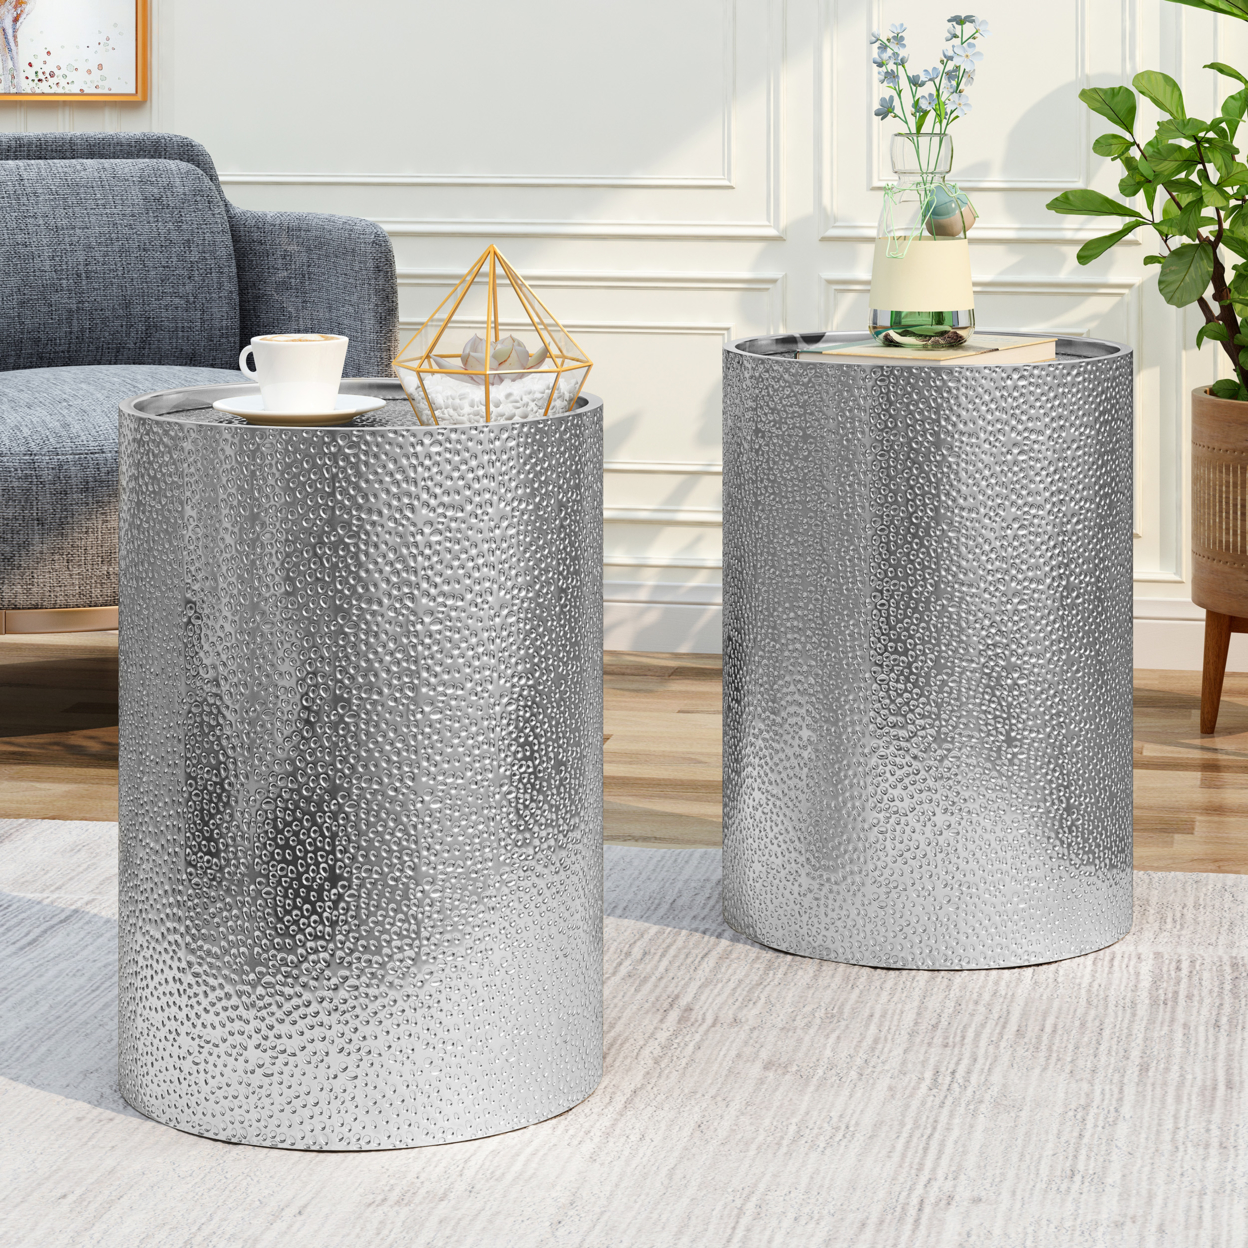 Kaylee Modern Round Hammered Iron Accent Table (2 Pack) - Silver - Silver